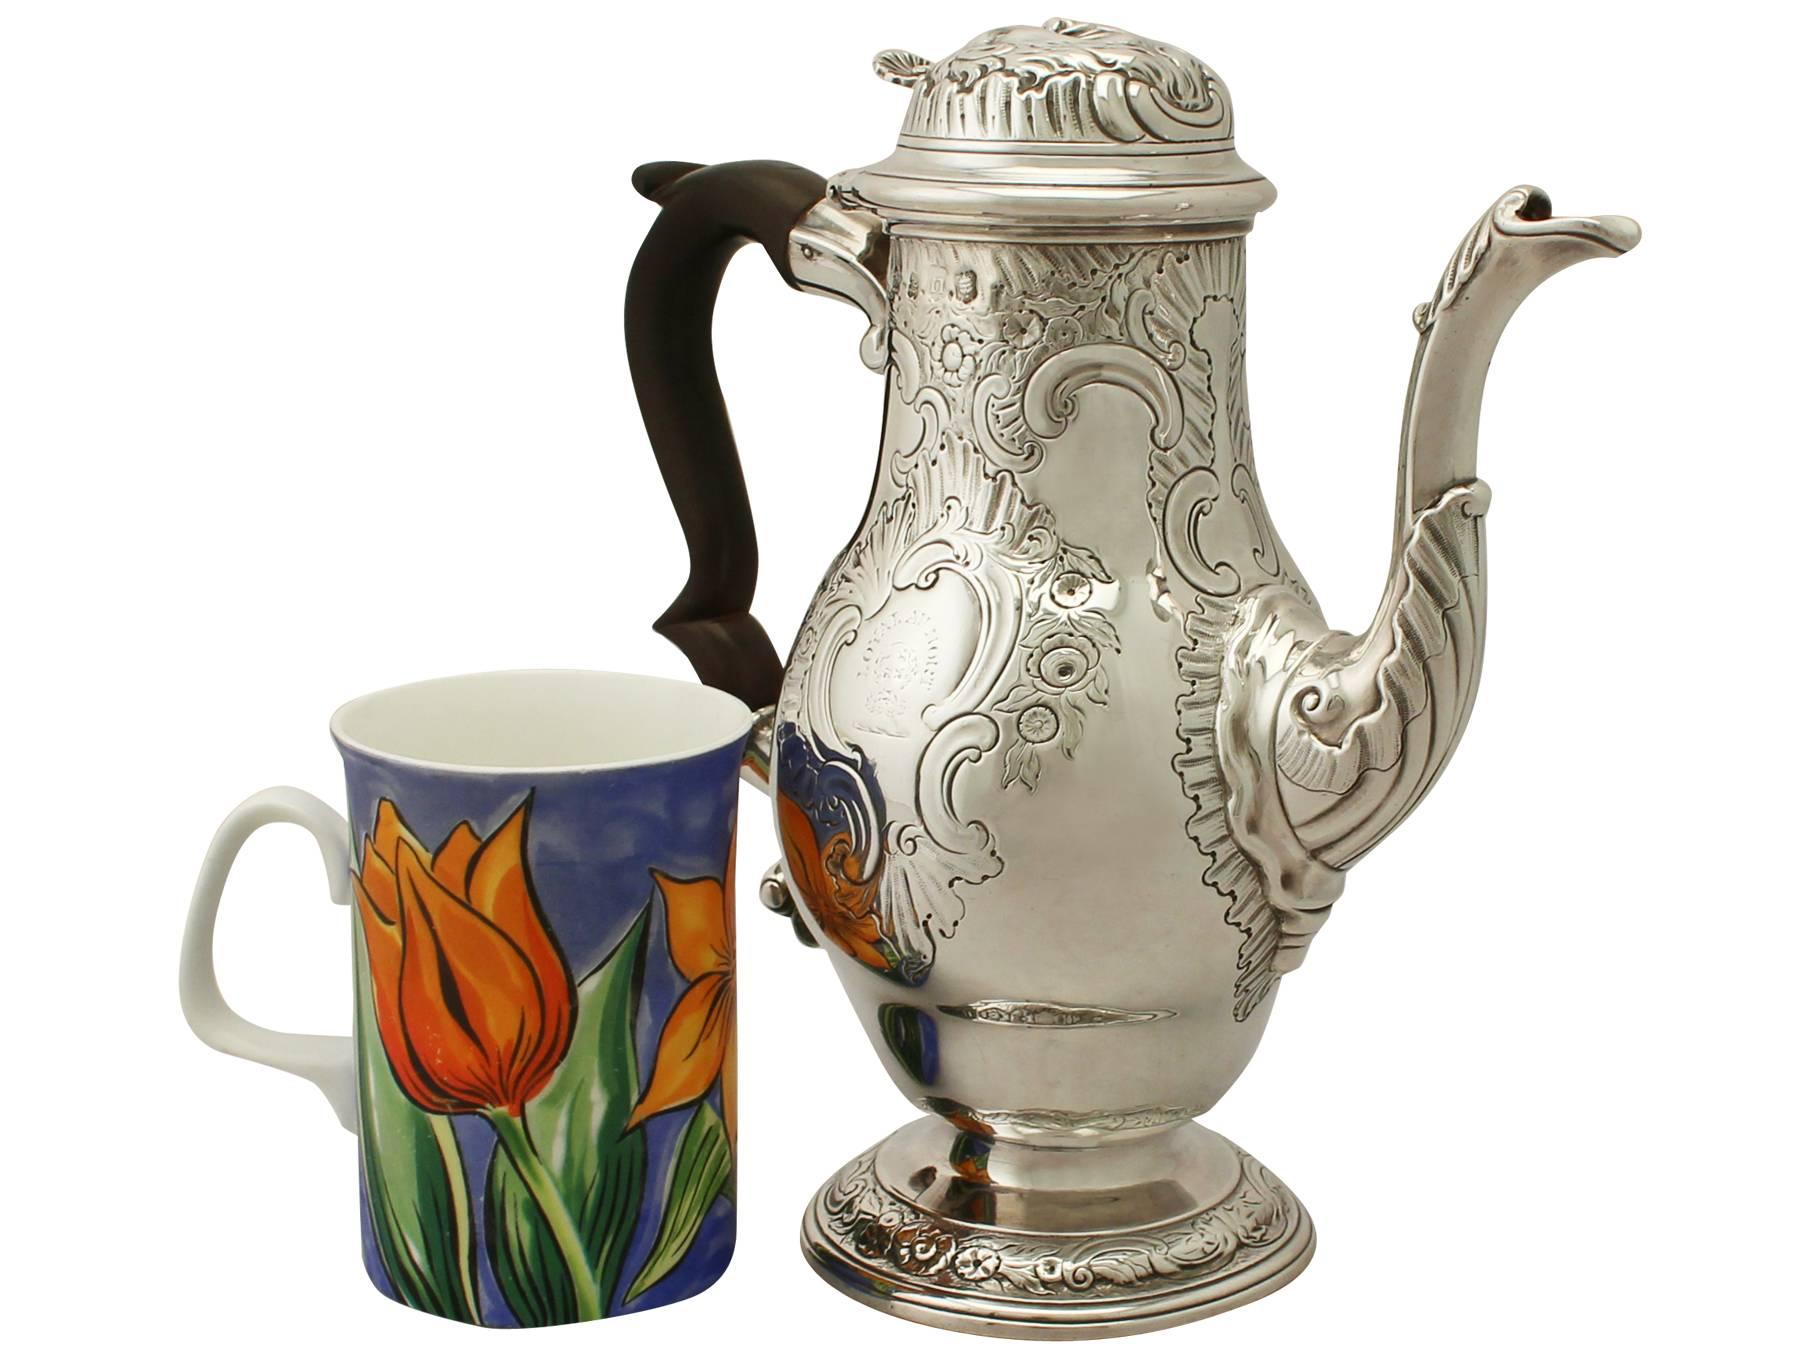 An exceptional, fine and impressive antique George II English sterling silver coffee pot, an addition to our Georgian silver teaware collection.

This exceptional antique Georgian sterling silver coffee pot has a baluster shaped form onto a